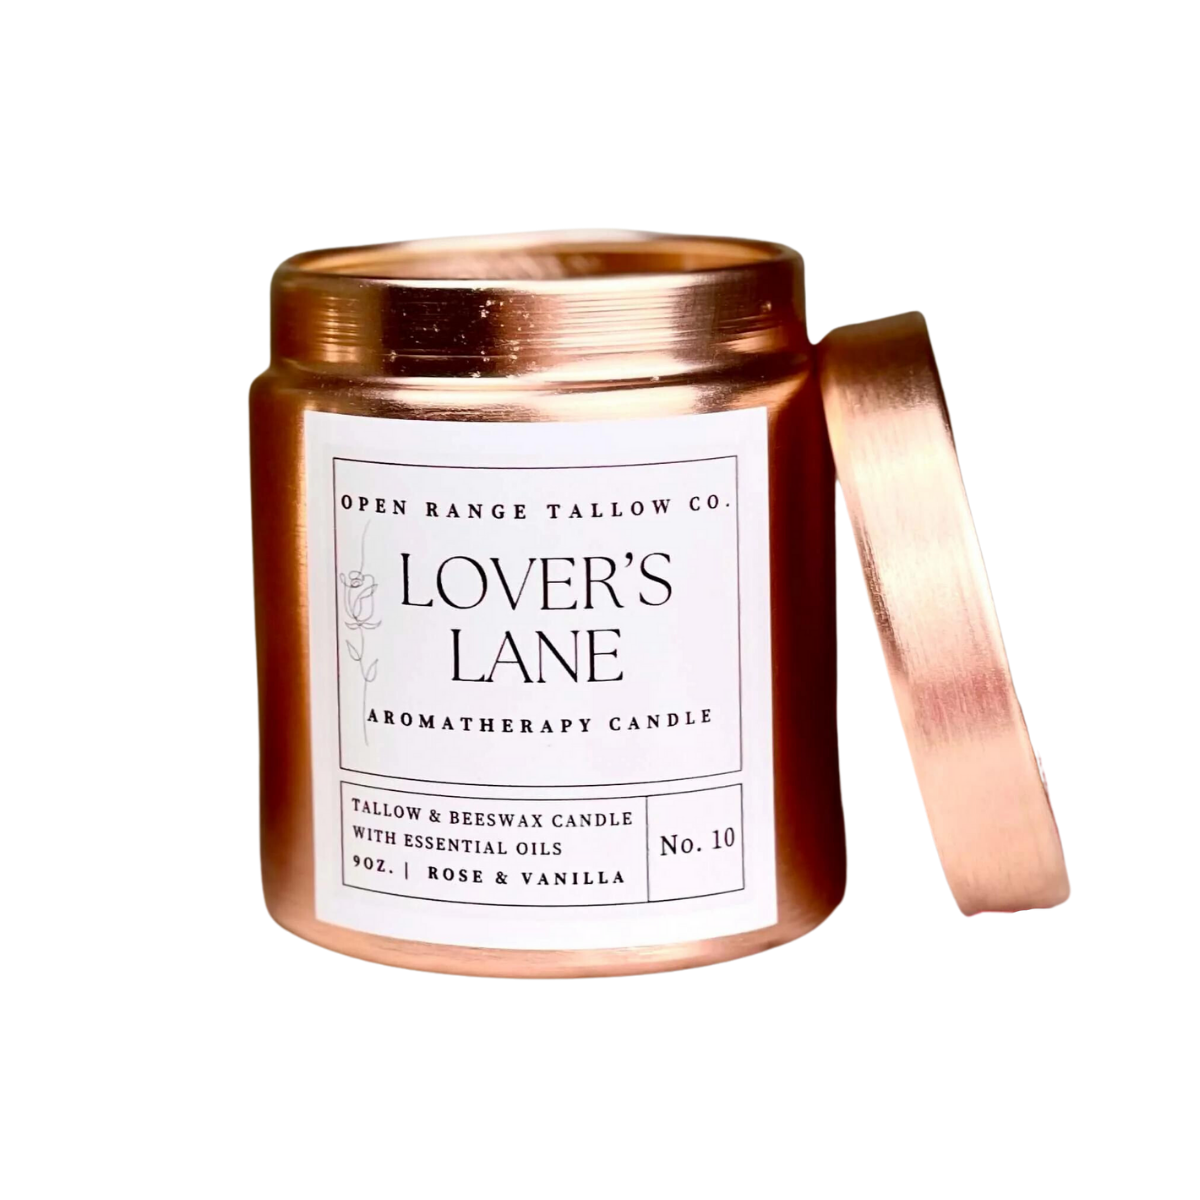 Lover's Lane Tallow and Beeswax Candle